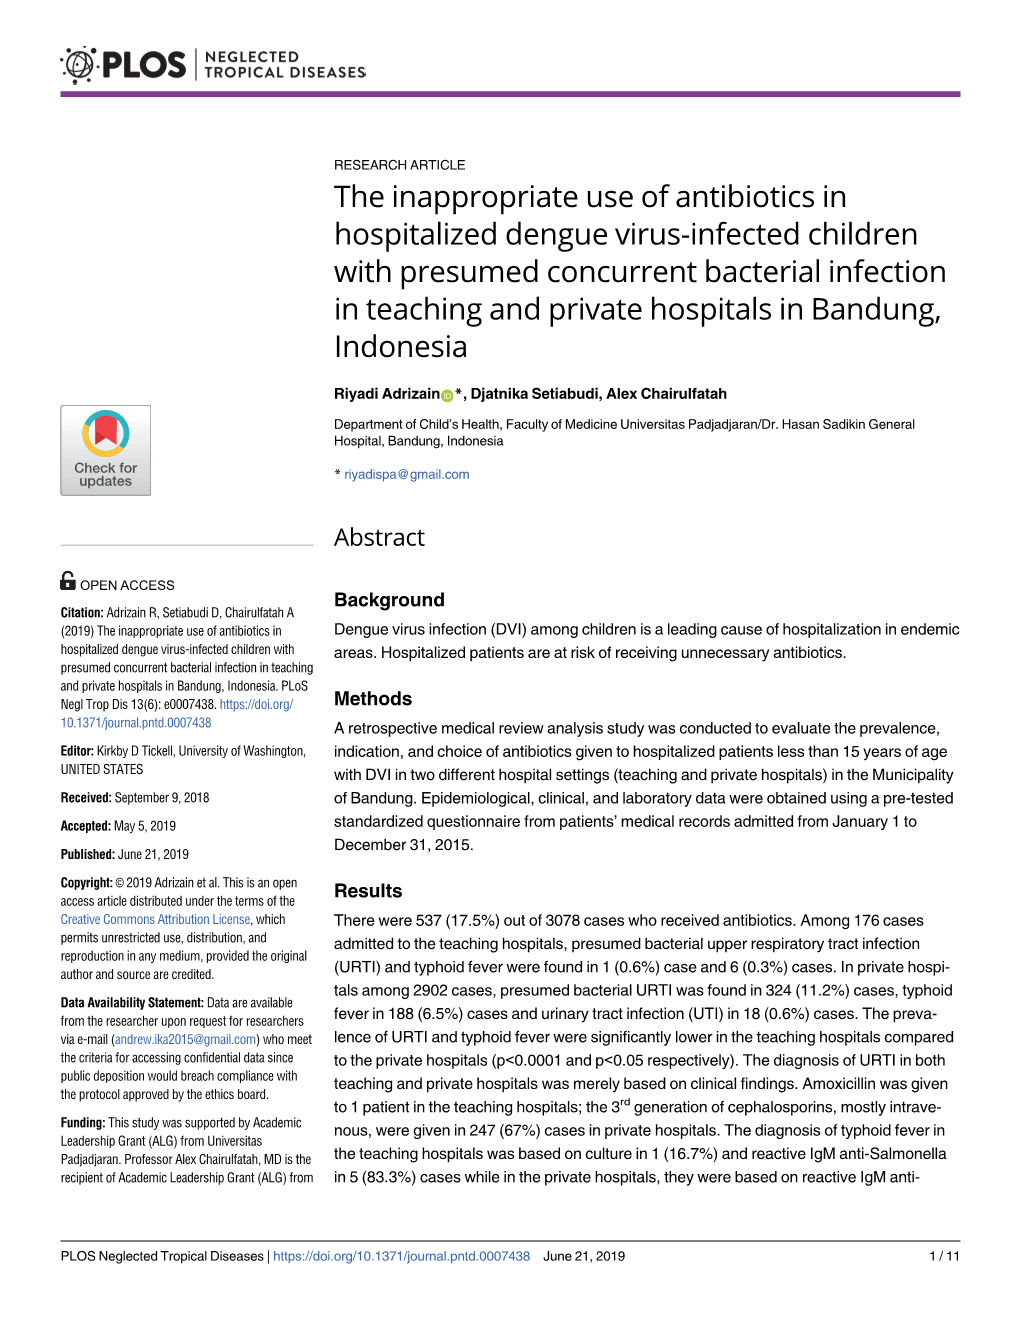 The Inappropriate Use of Antibiotics in Hospitalized Dengue Virus-Infected